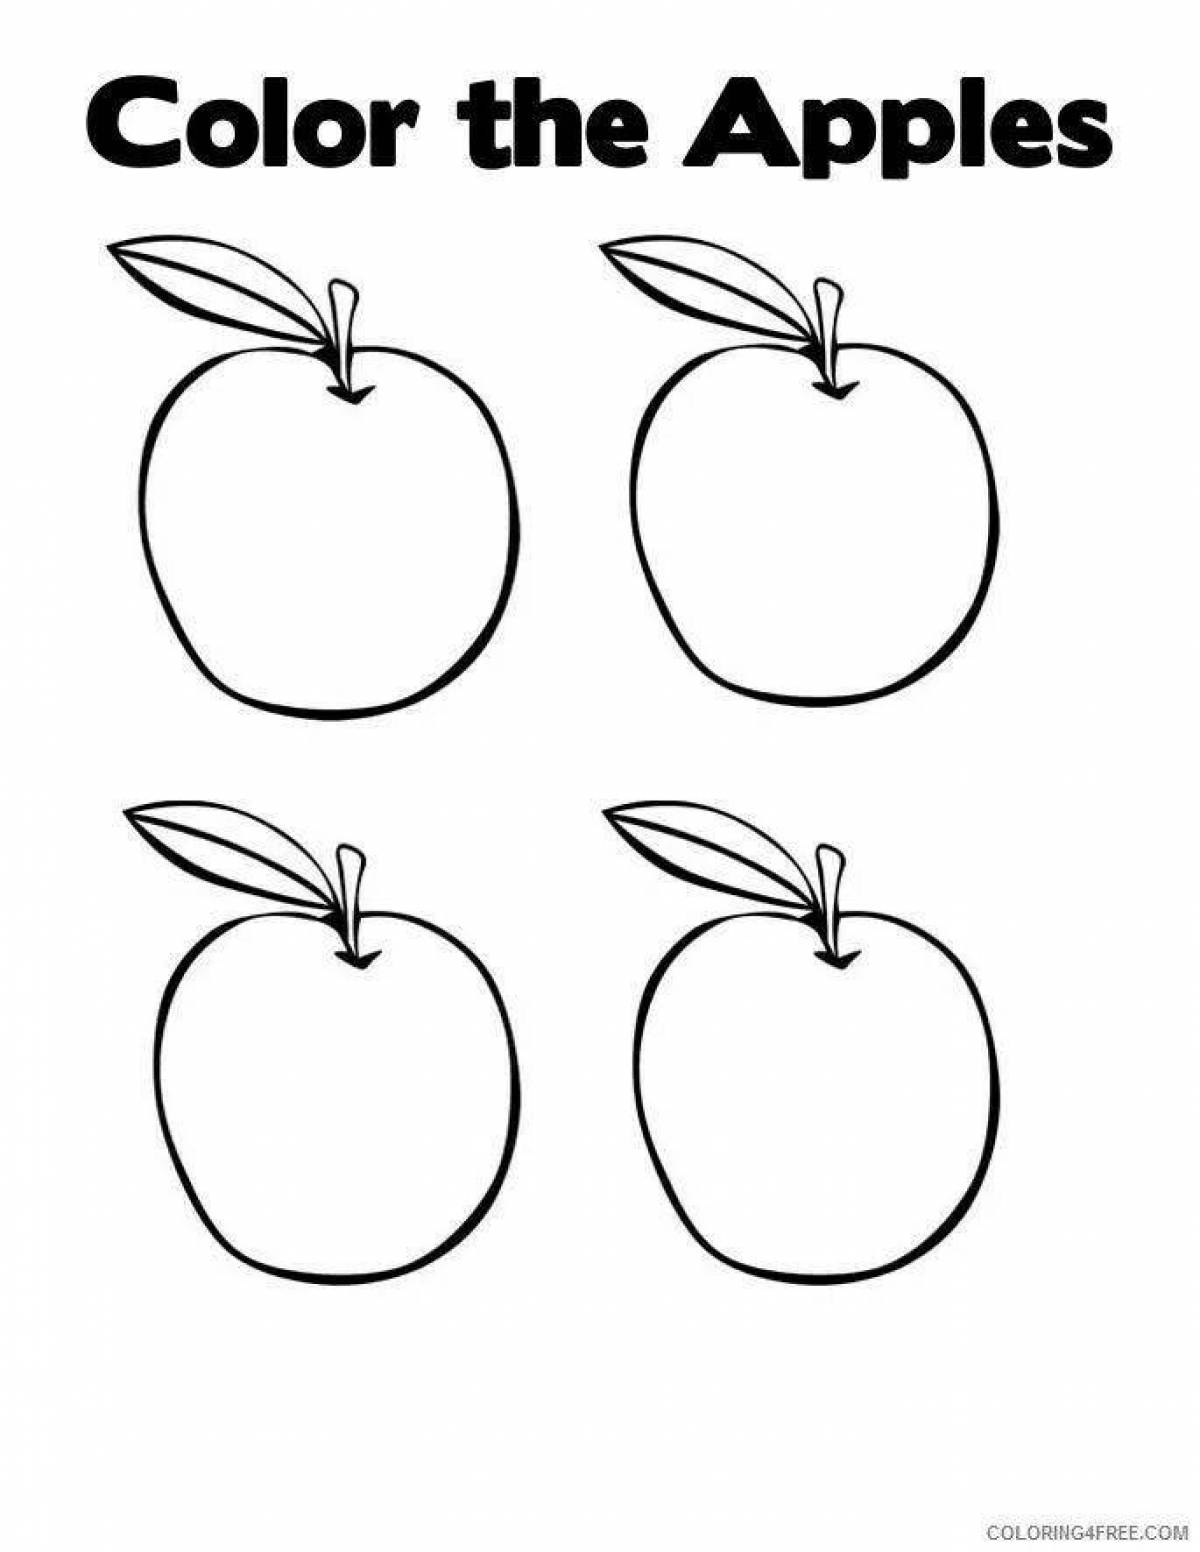 Fun apple coloring book for 5-6 year olds